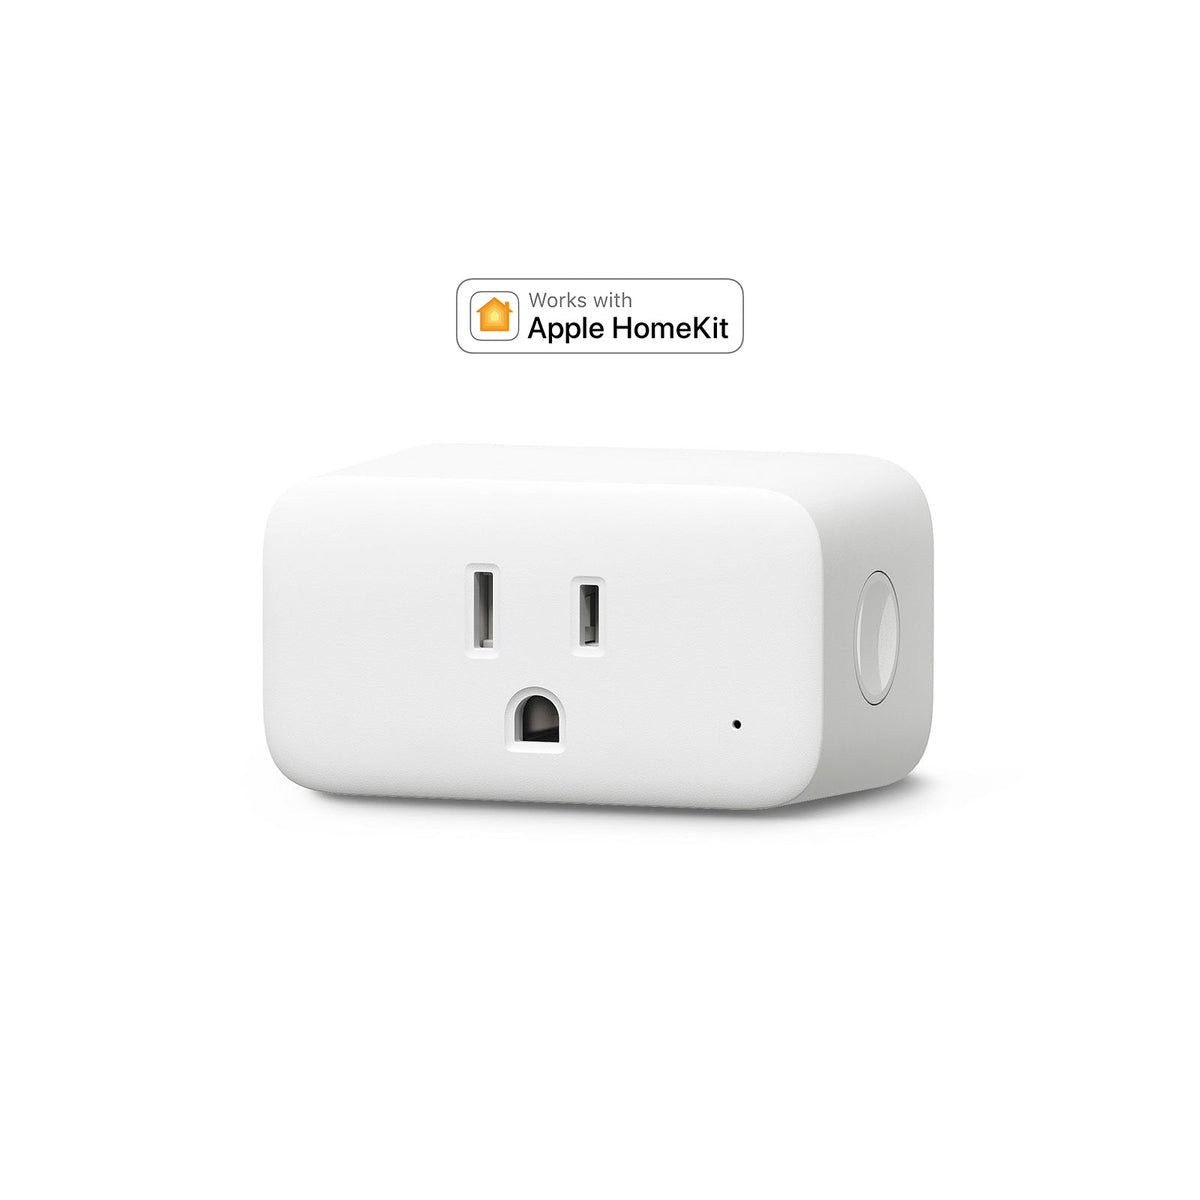 SwitchBot Plug Mini, Smart Wi-Fi and Bluetooth Outlet, 15A, 4 Pack